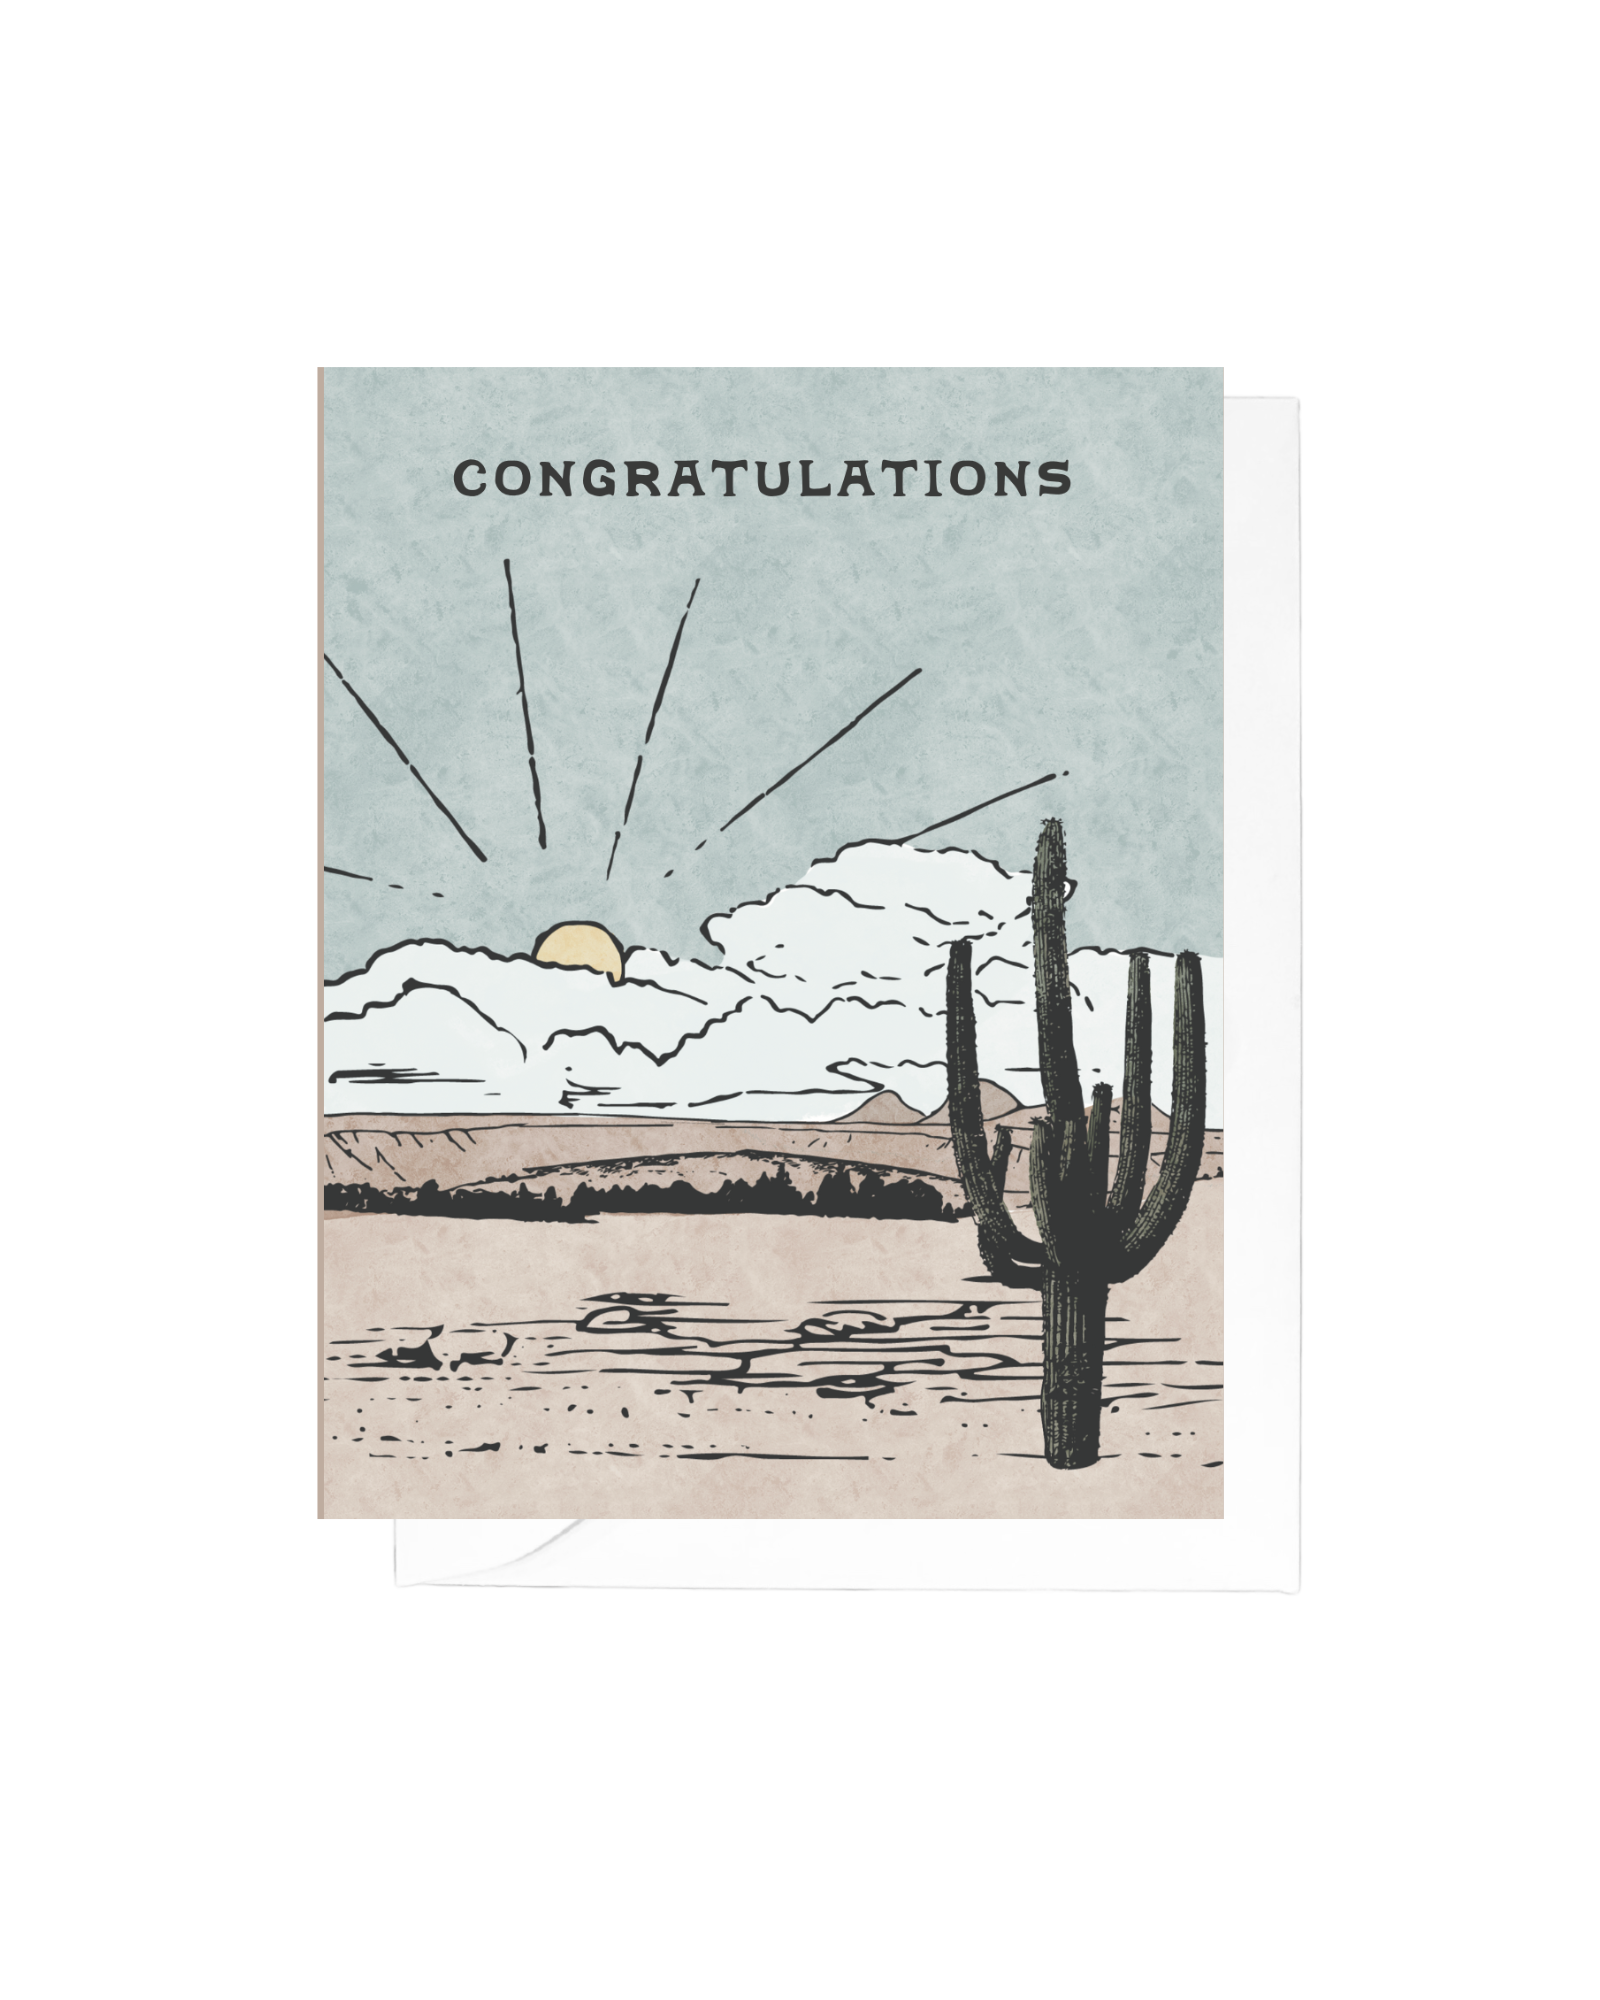 Desert landscape in muted colors beneath the word "congratulations"